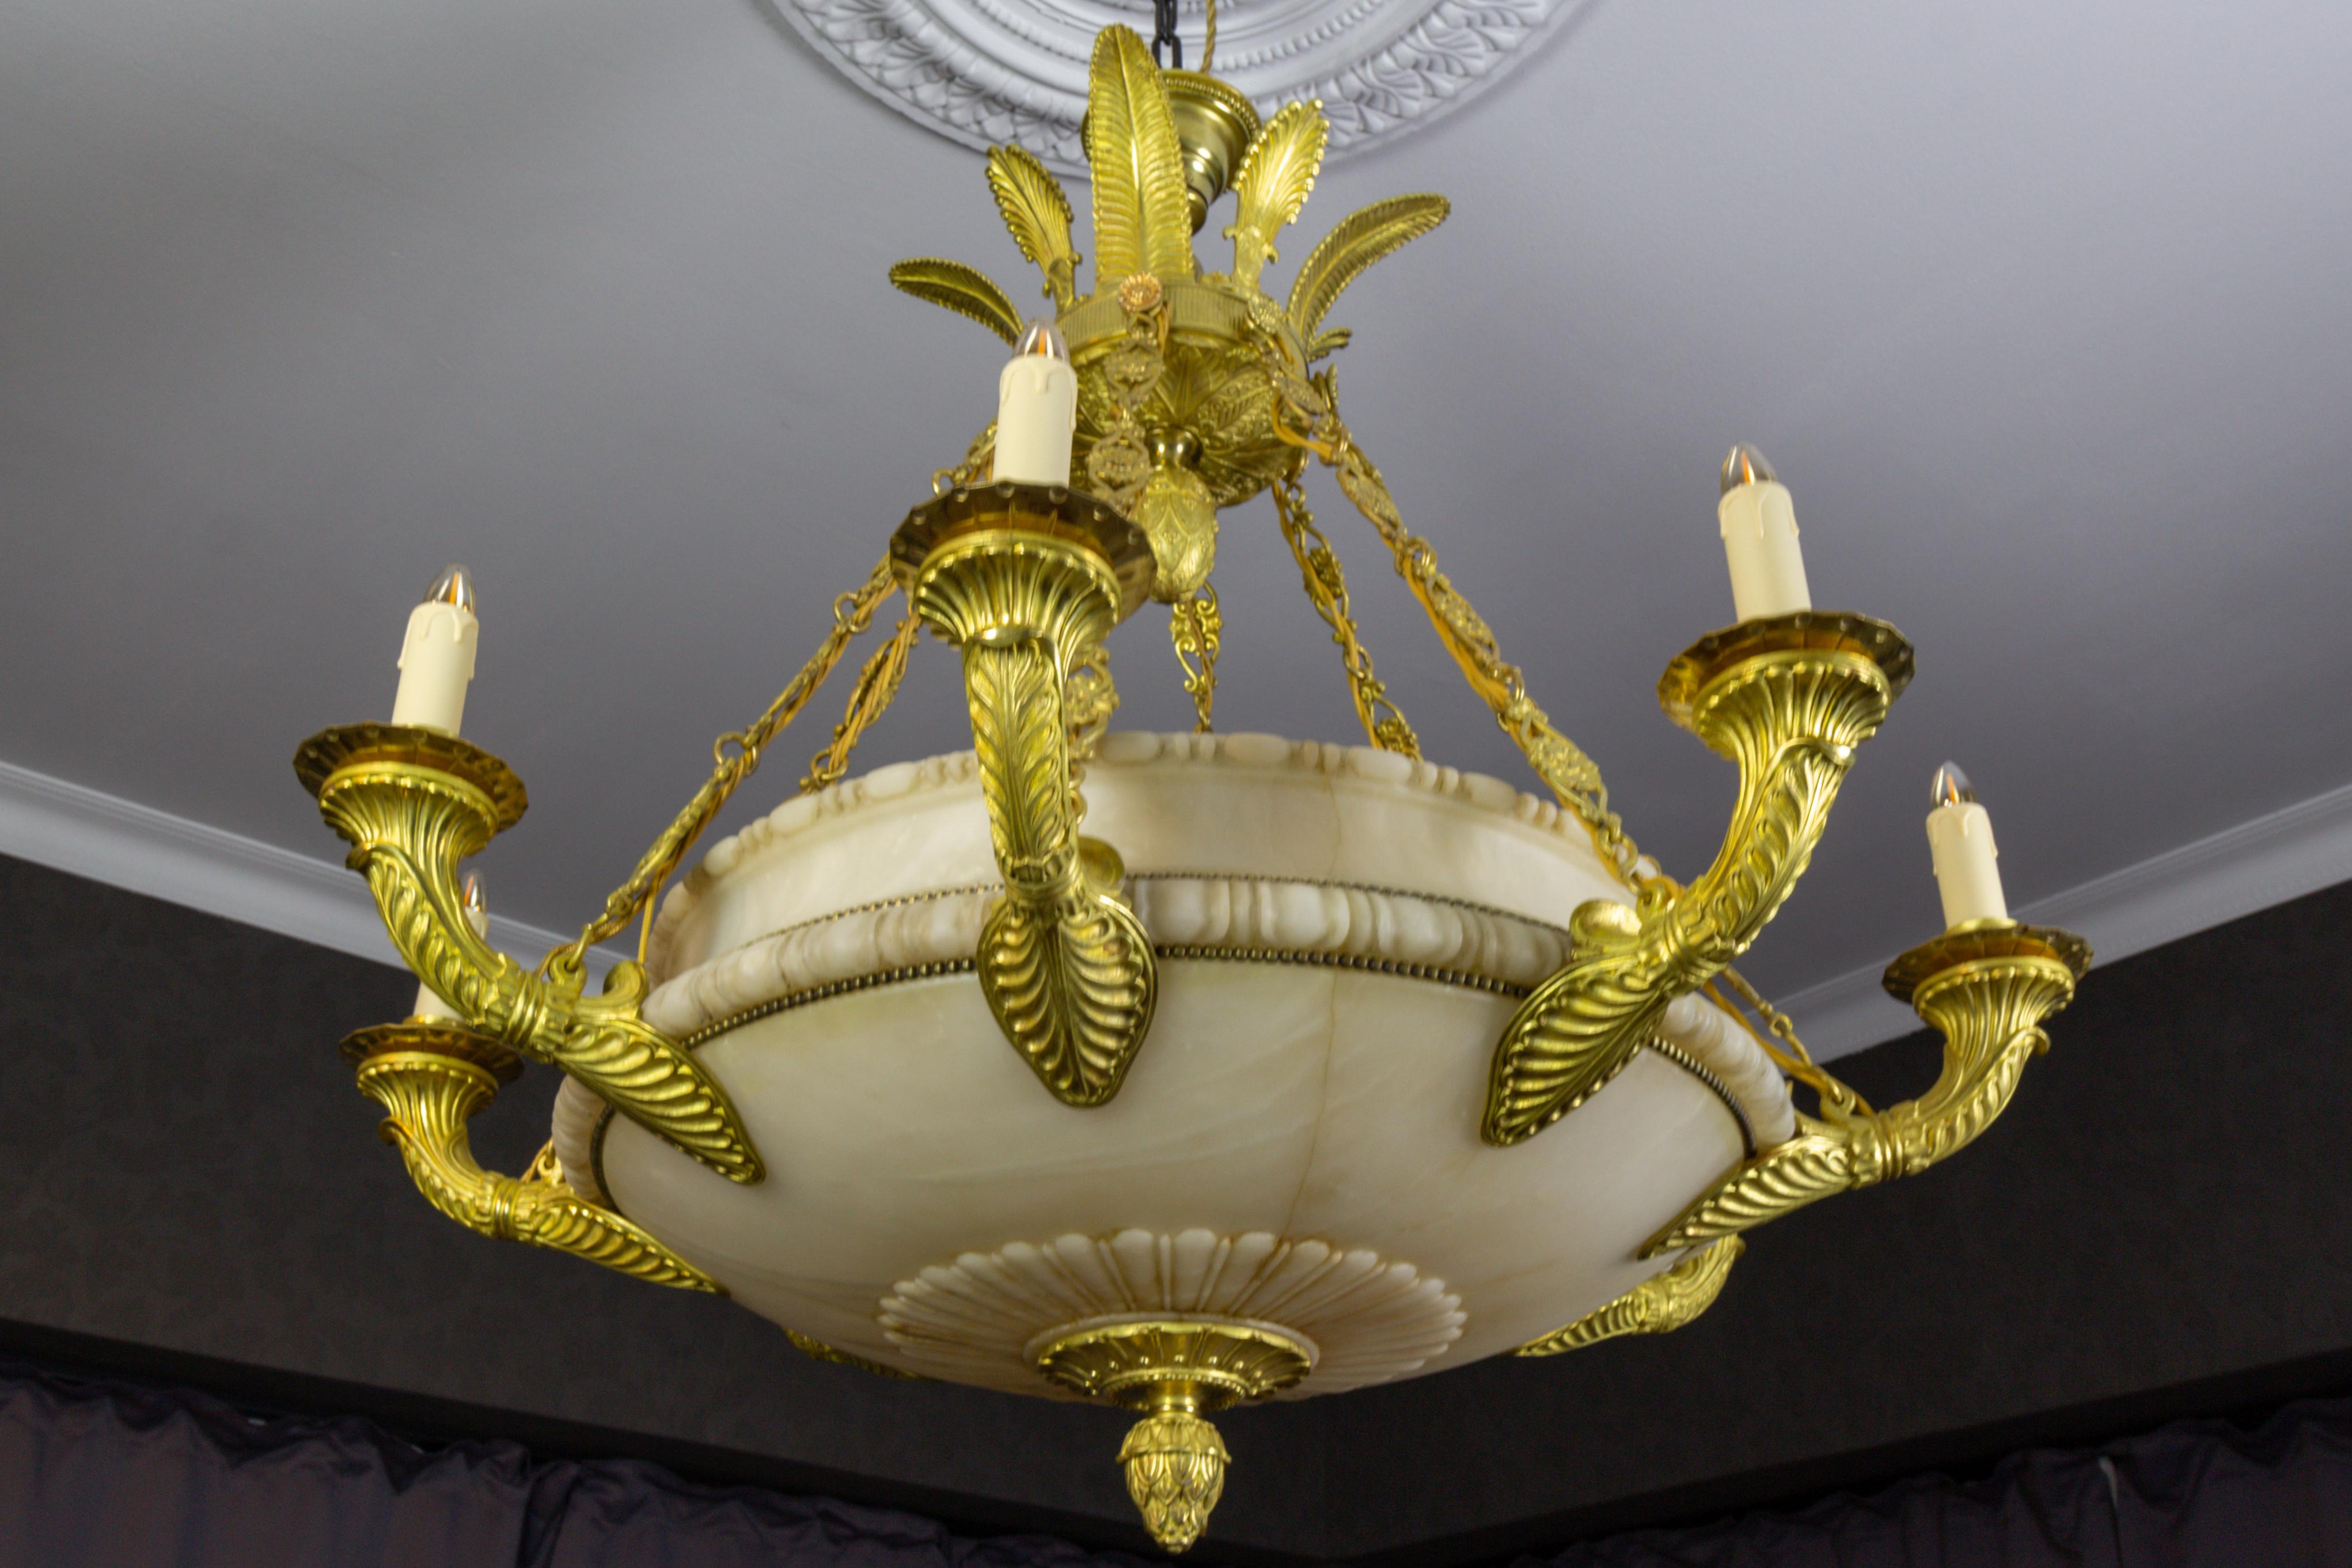 Large Empire-style alabaster and bronze chandelier, Germany, ca. 1920.
An impressive sixteen-light alabaster and bronze chandelier. The extra large, exceptional, and masterfully carved white alabaster bowl features delicate carvings and a bronze